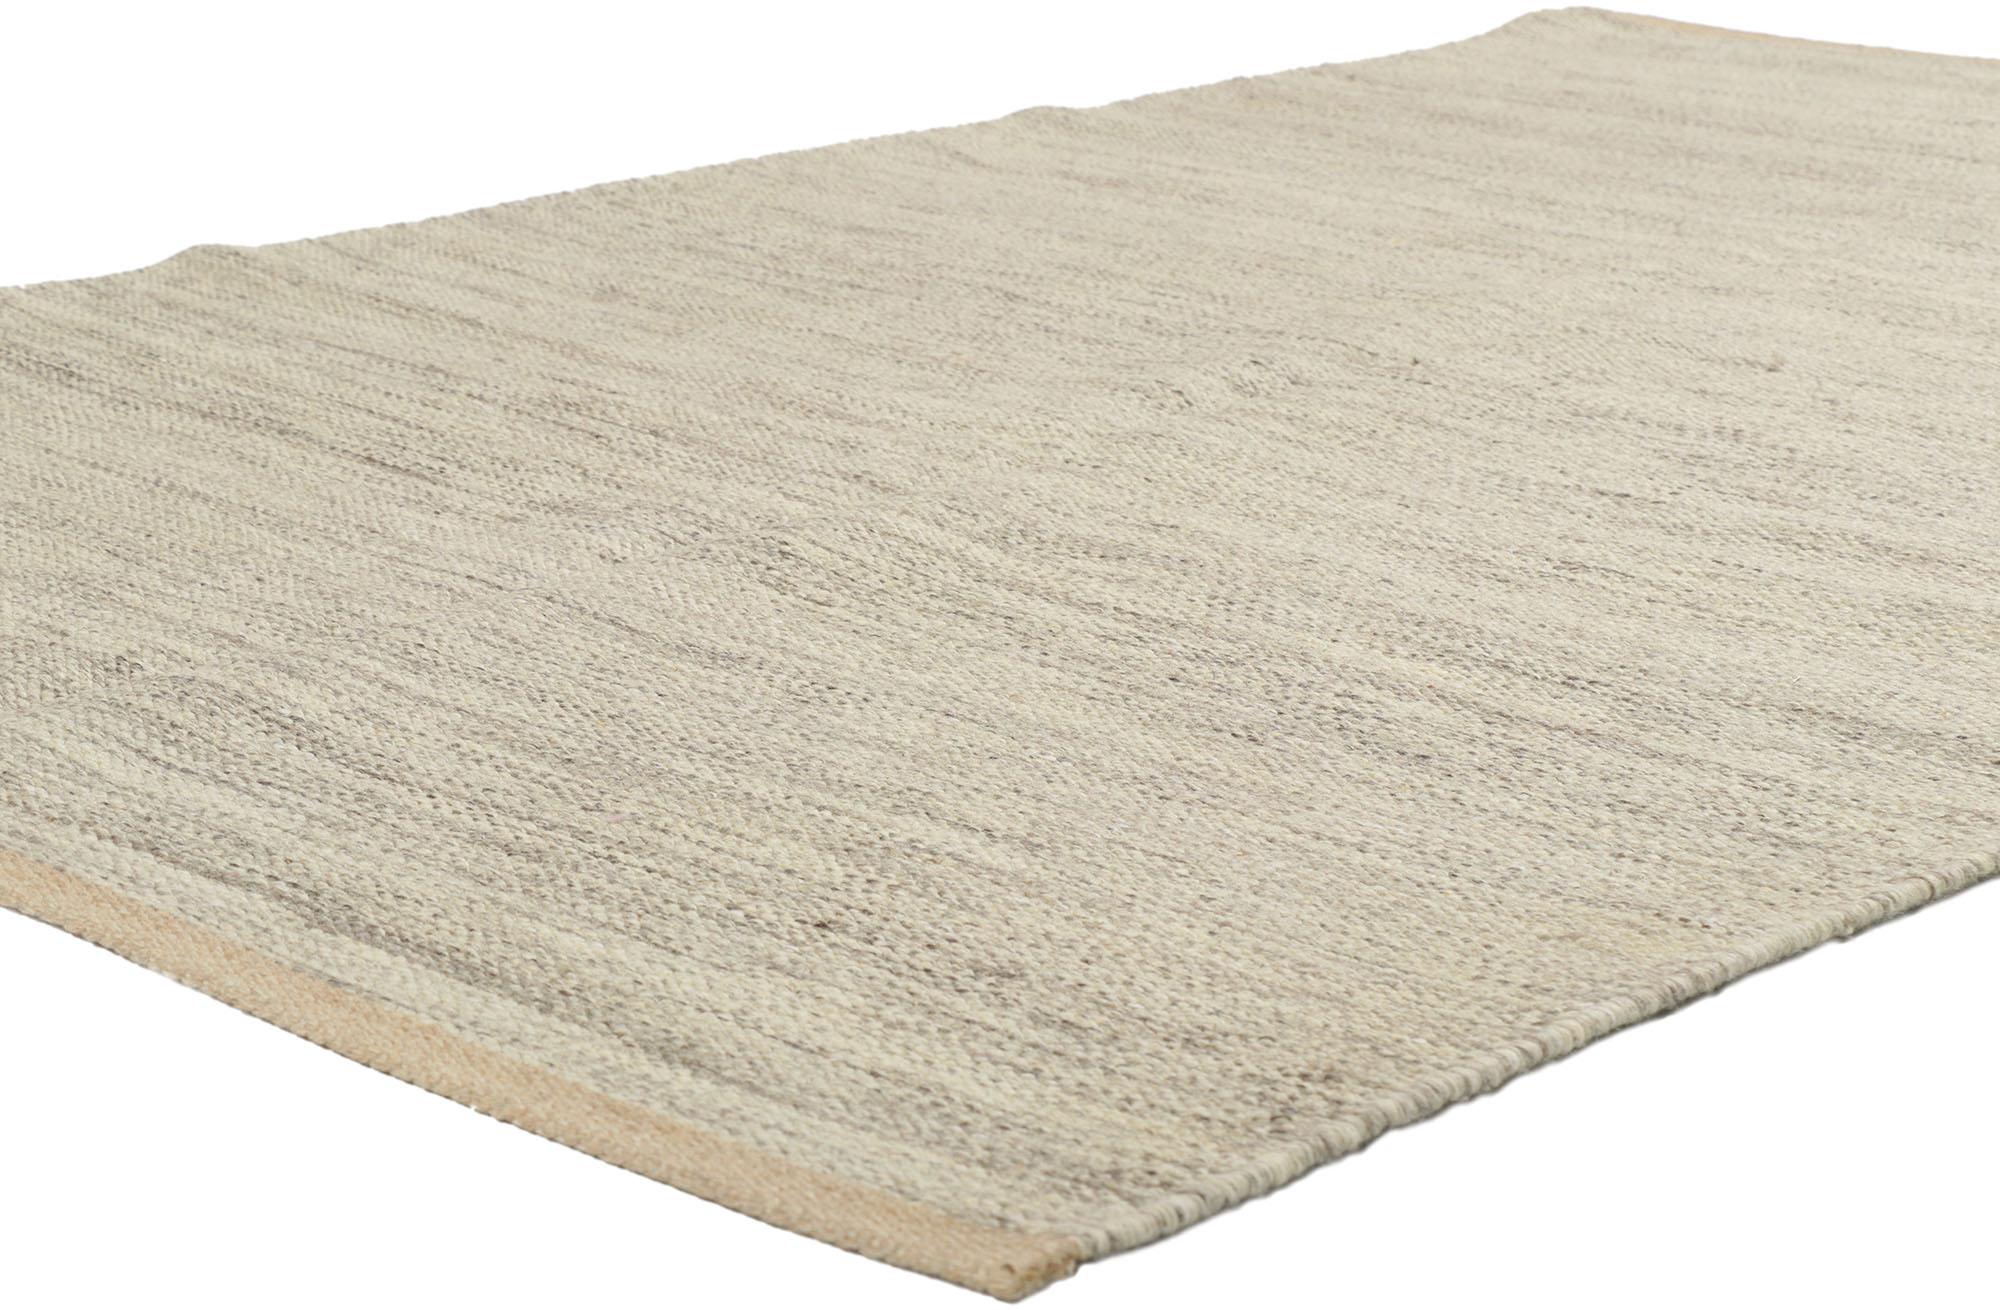 30699 New Swedish Inspired Kilim Rug with Minimalist Scandinavian Modern Style 05'01 x 08'00. Warm and inviting with hygge vibes, this hand-woven wool Swedish inspired Kilim rug beautifully embodies the simplicity of Scandinavian modern style.